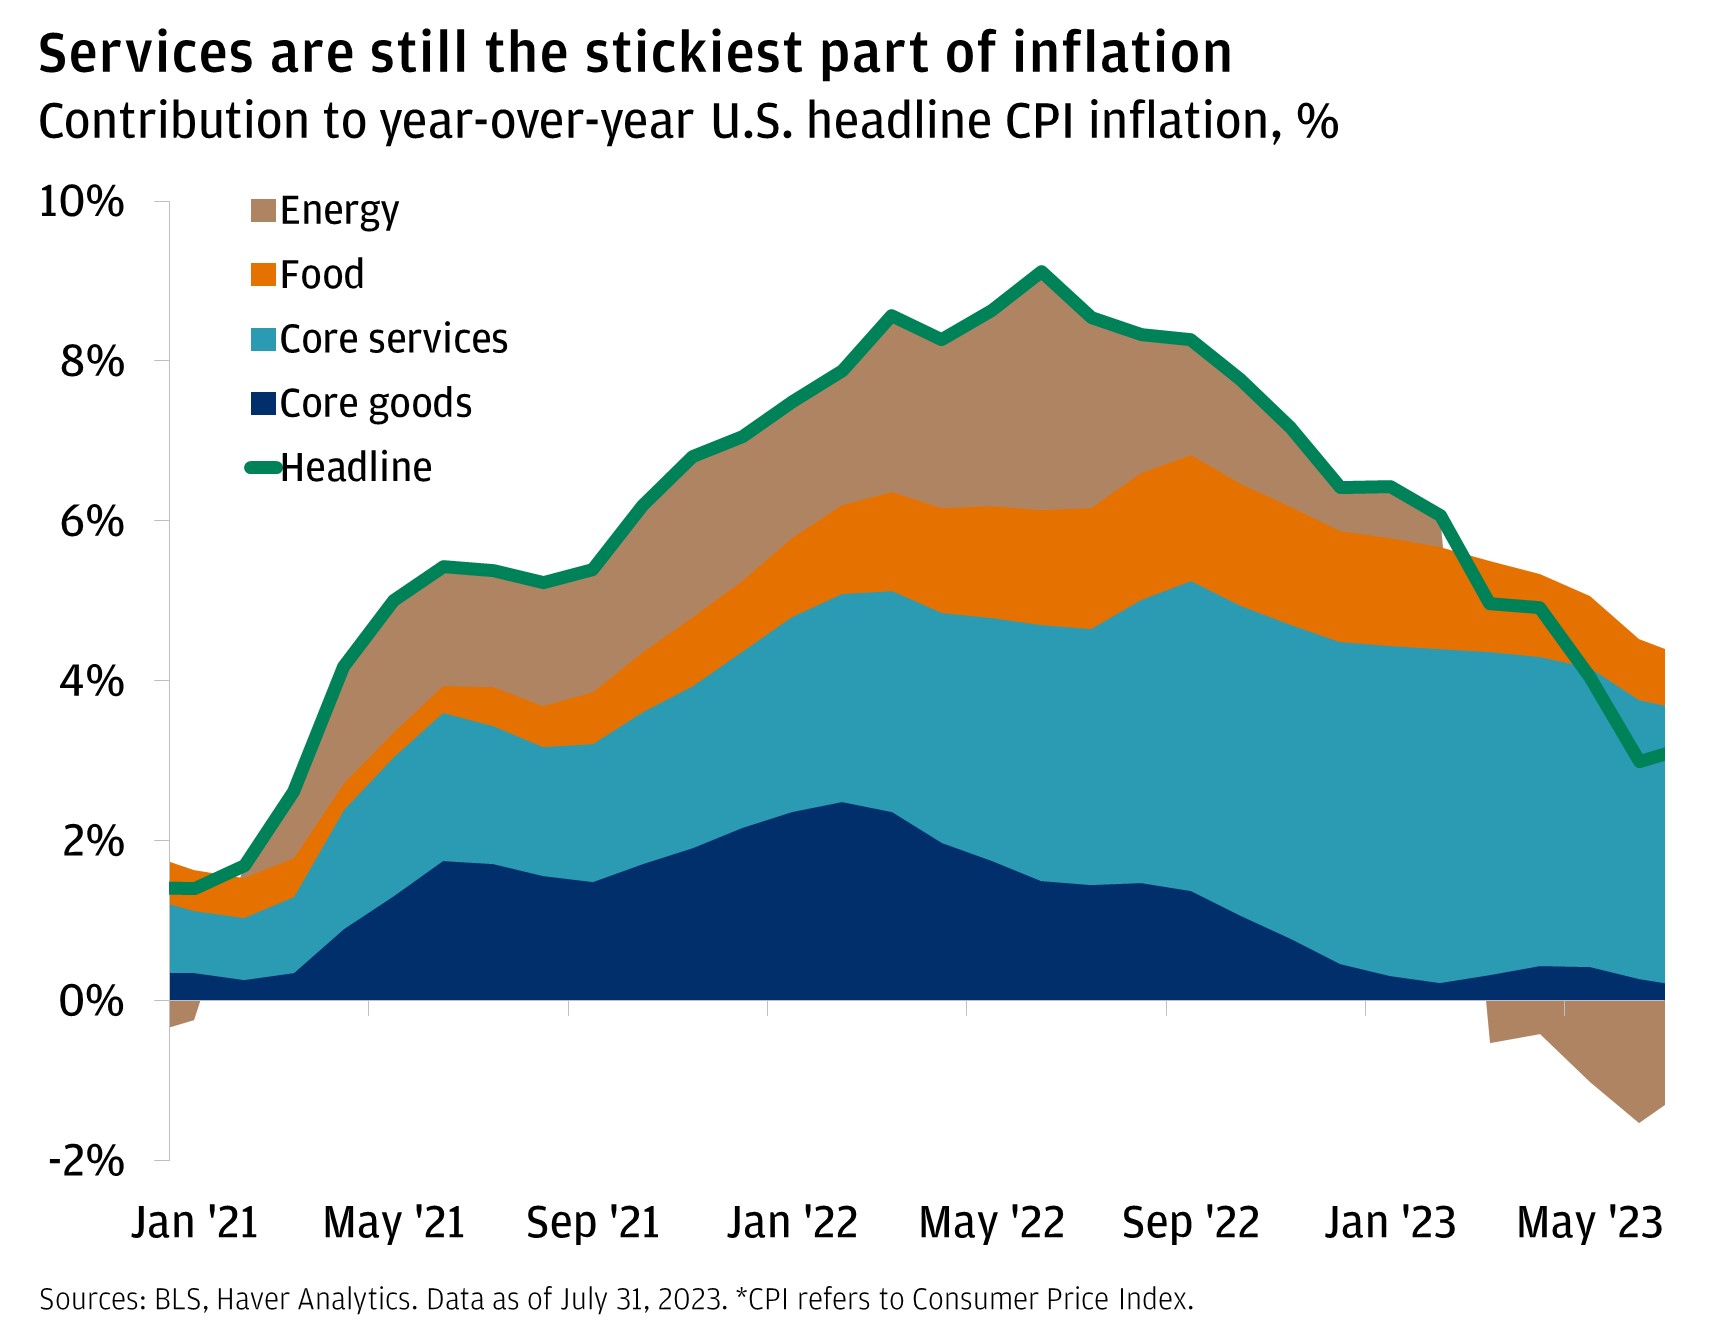 Services are still the stickiest part of inflation